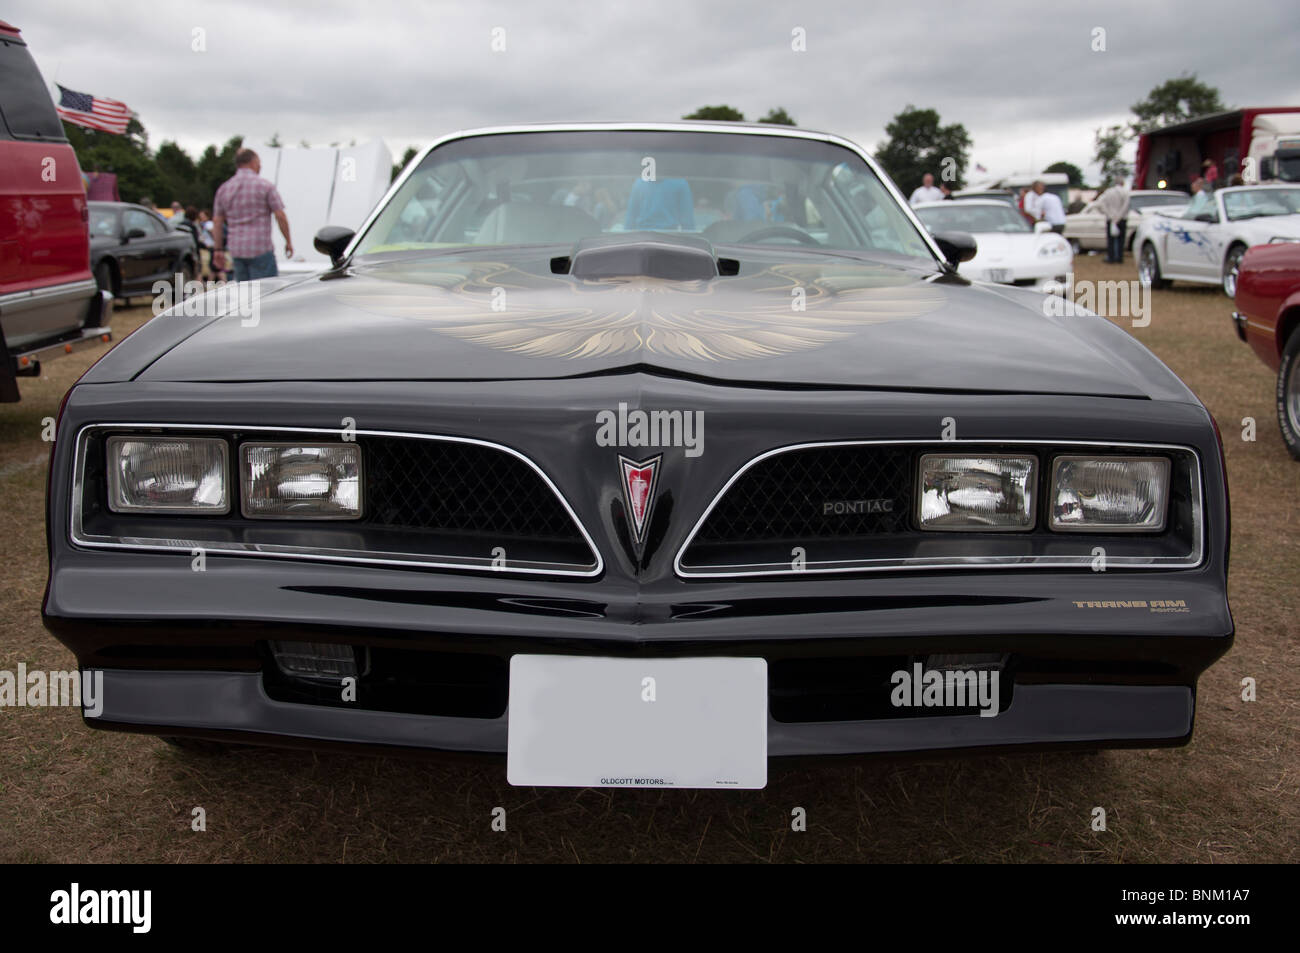 The front of a 1978 Pontiac Trans Am car at an American car show on 4th July 'Independence day' in Tatton Park, Cheshire. Stock Photo